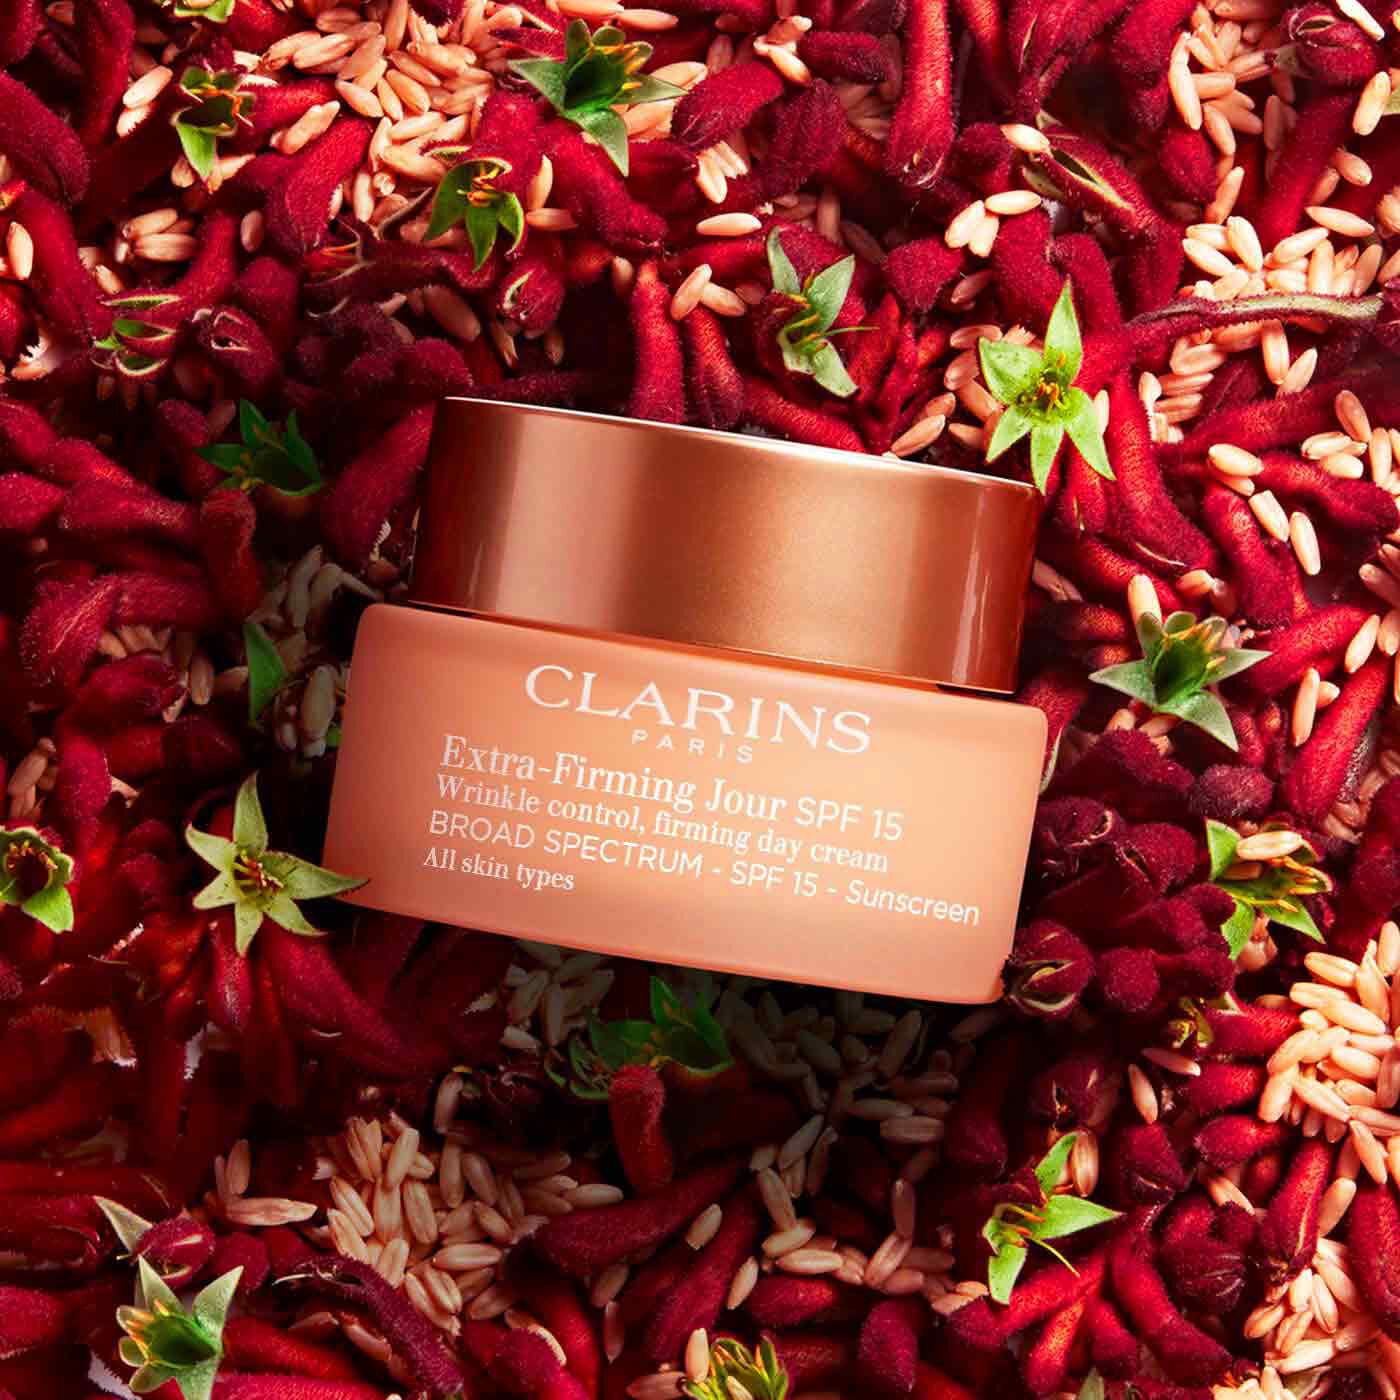 Extra-Firming Day Cream SPF 15 - Day Skincare - Clarins